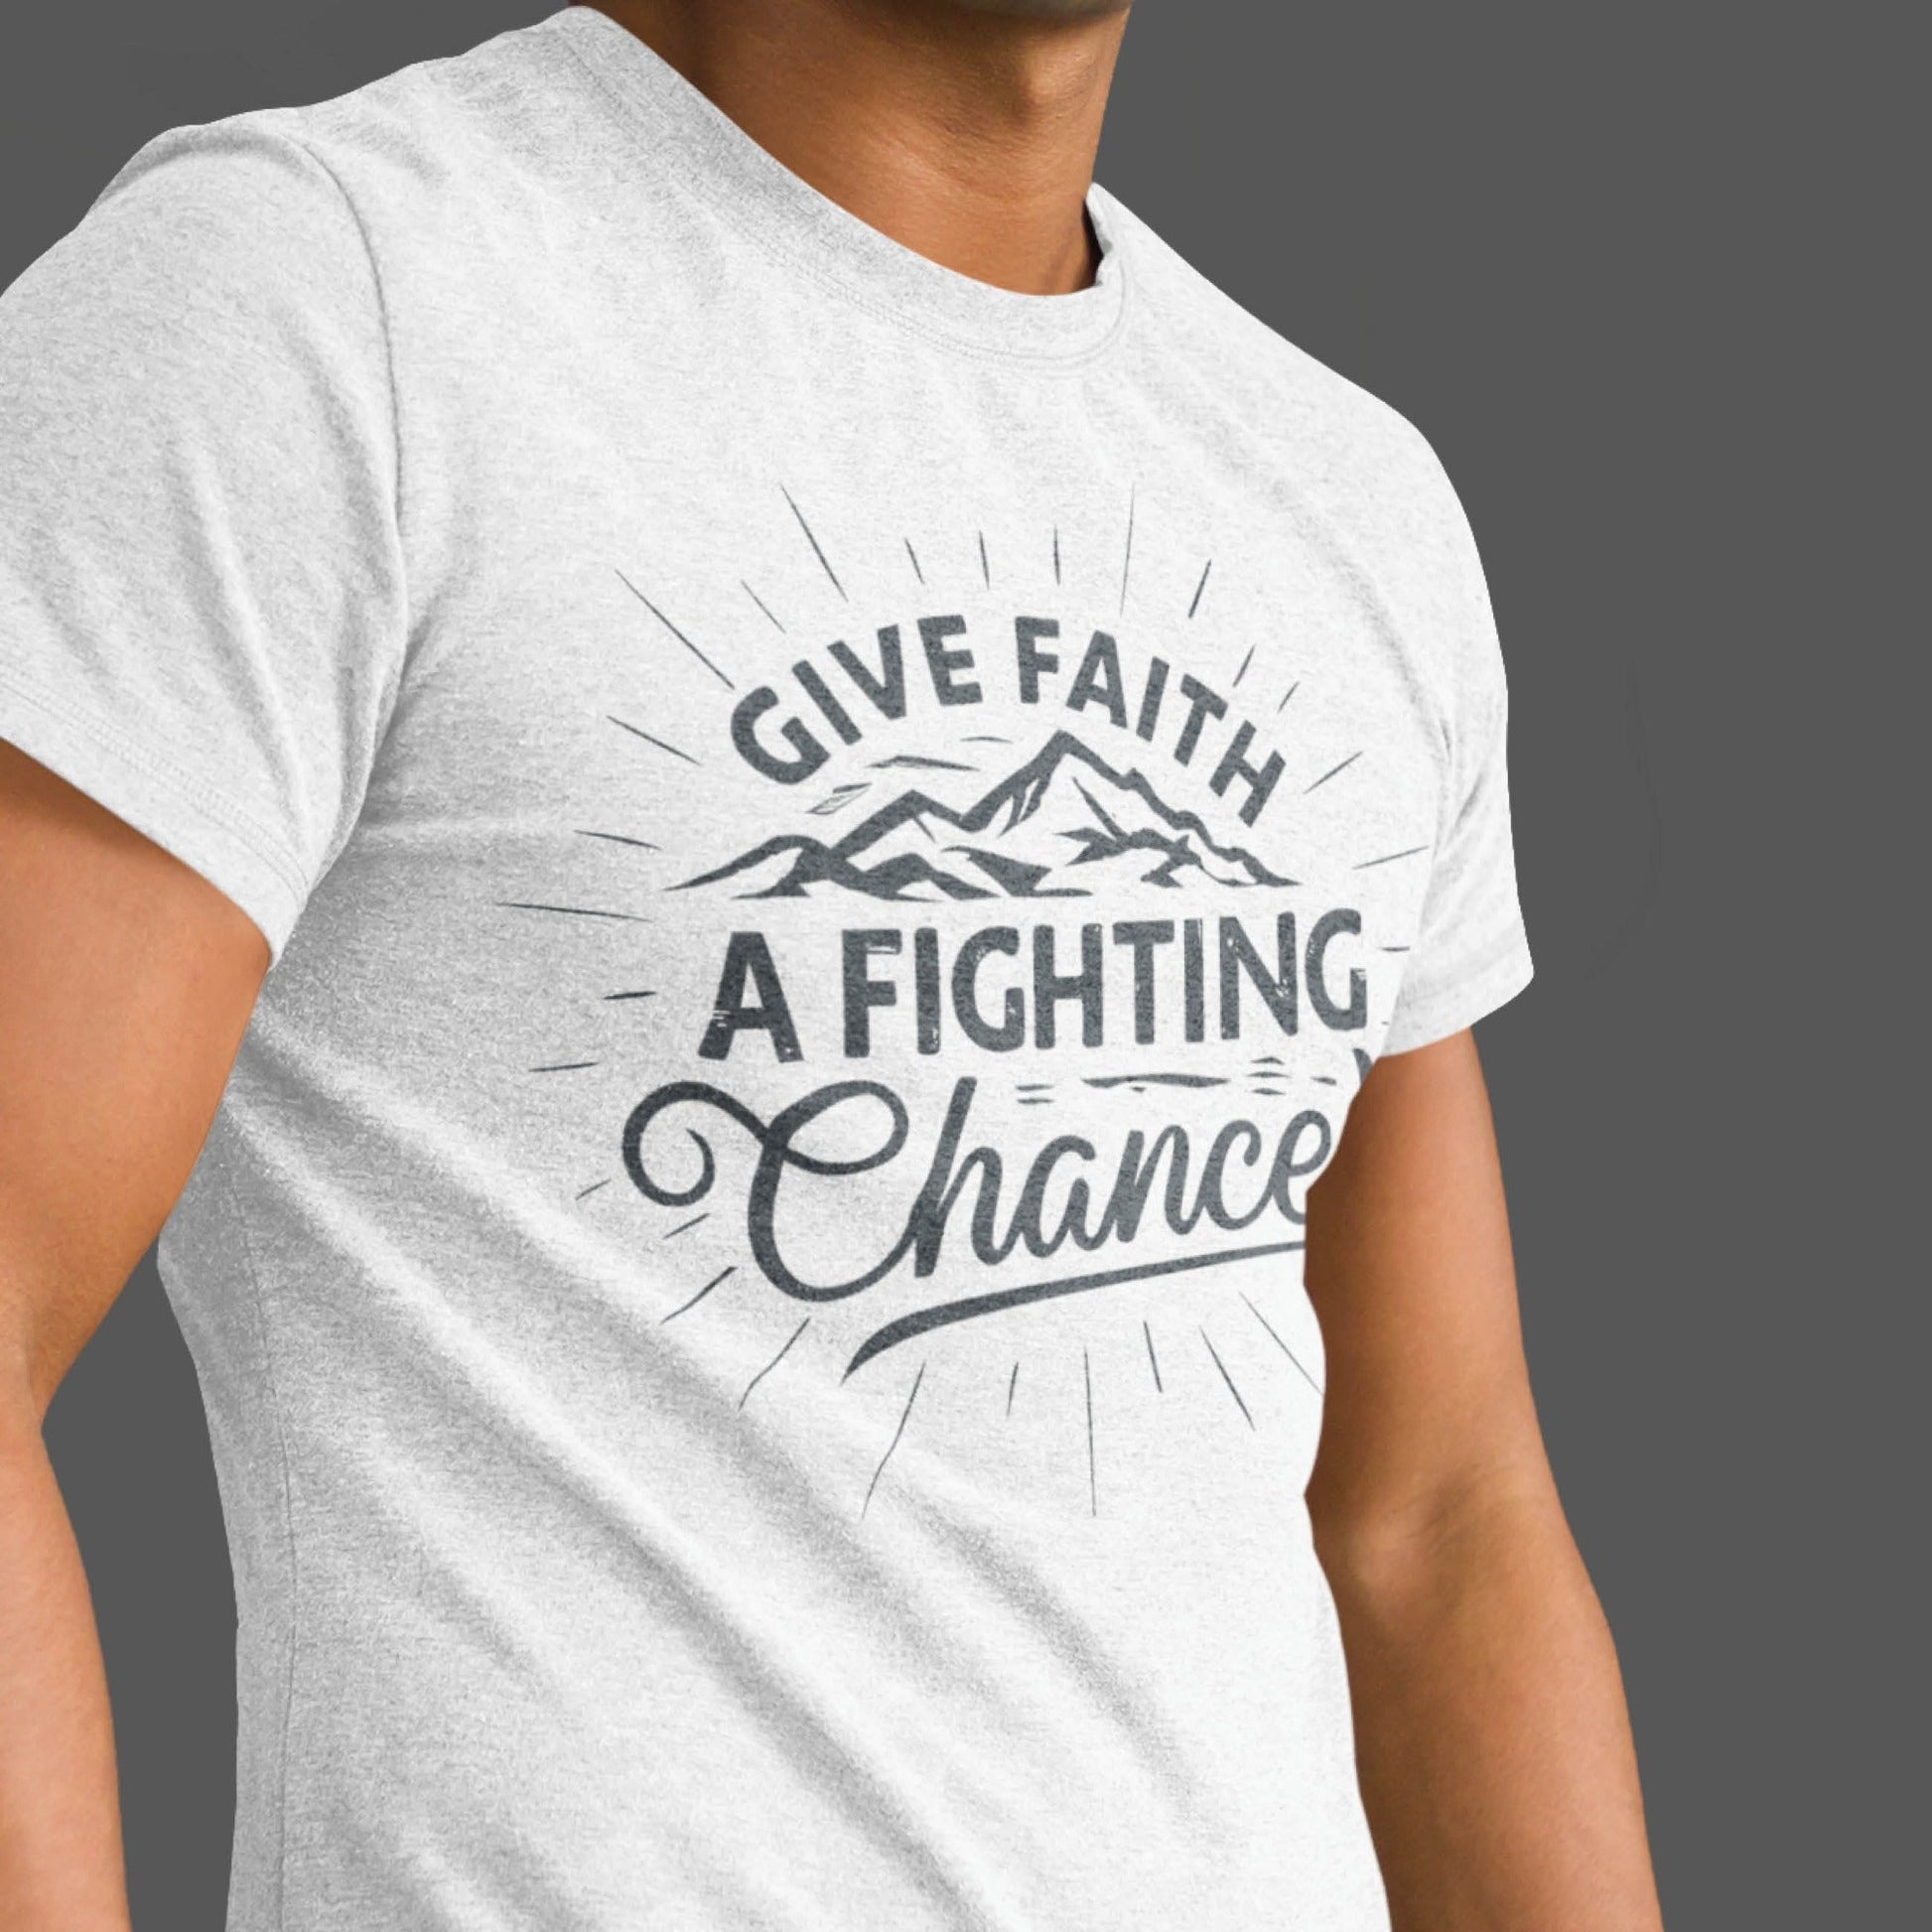 Young man wearing a Heather Gray Unisex Tee with Christian Bible verse quote that says, "Give Faith A Fighting Chance" in charcoal gray with retro sunburst and mountain graphics, t-shirt designed for faith-based men and women